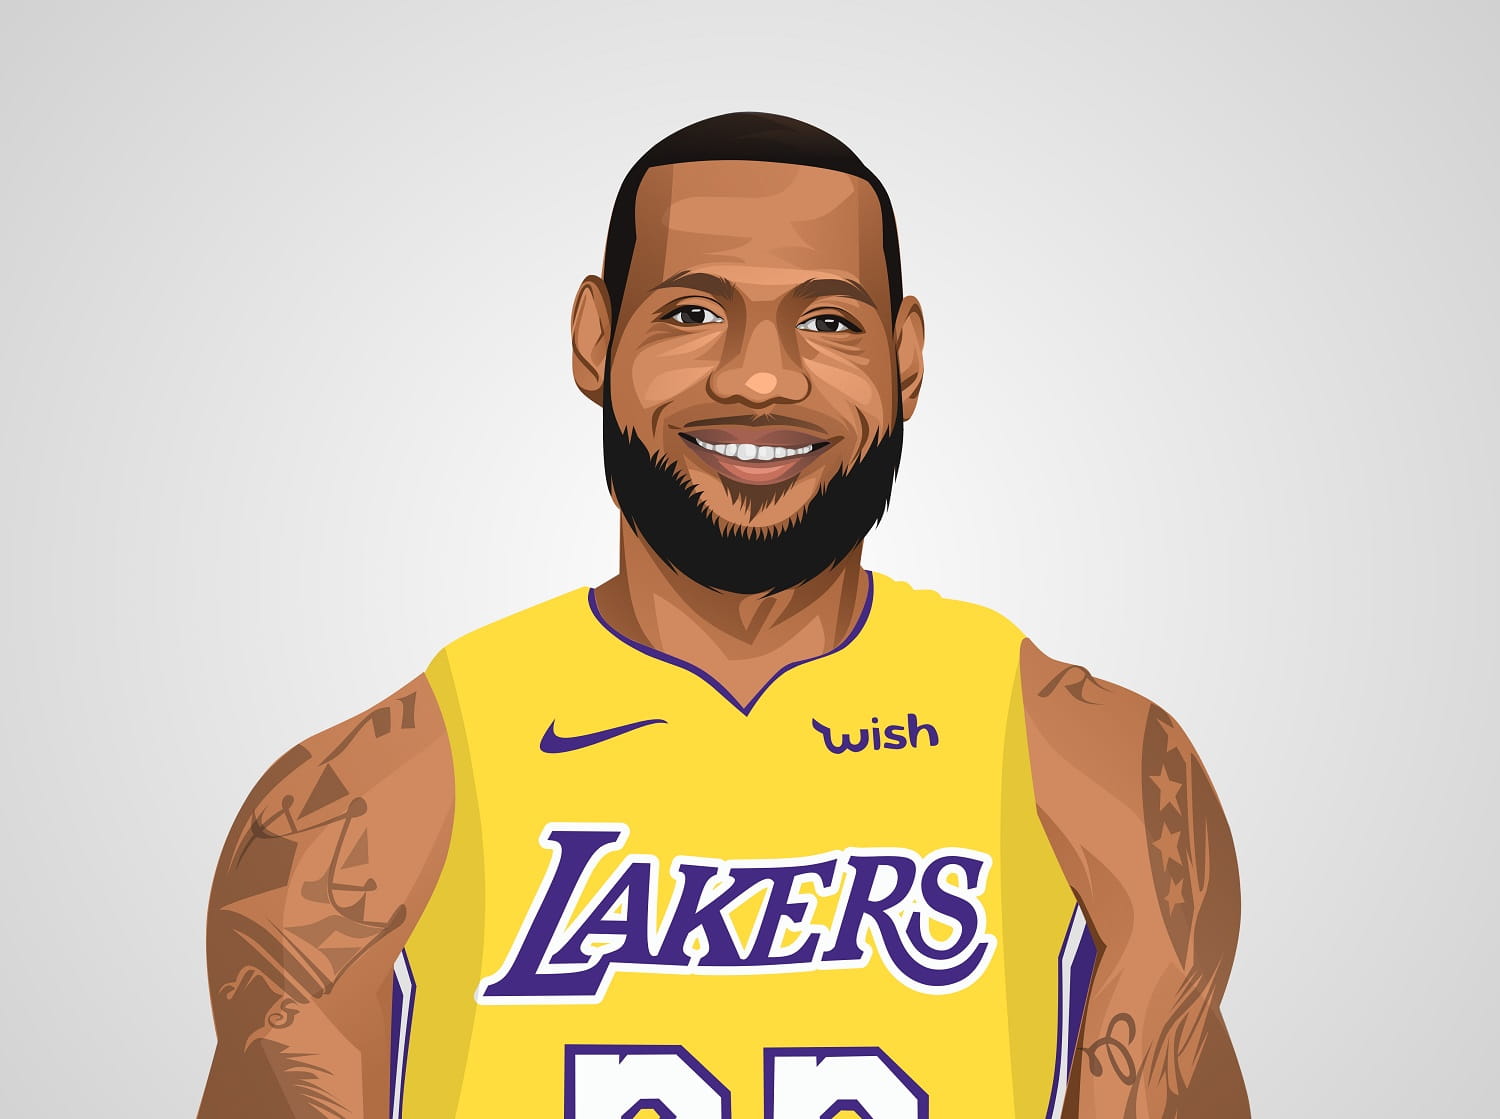 LeBron James Copyright by Inspirationfeed.